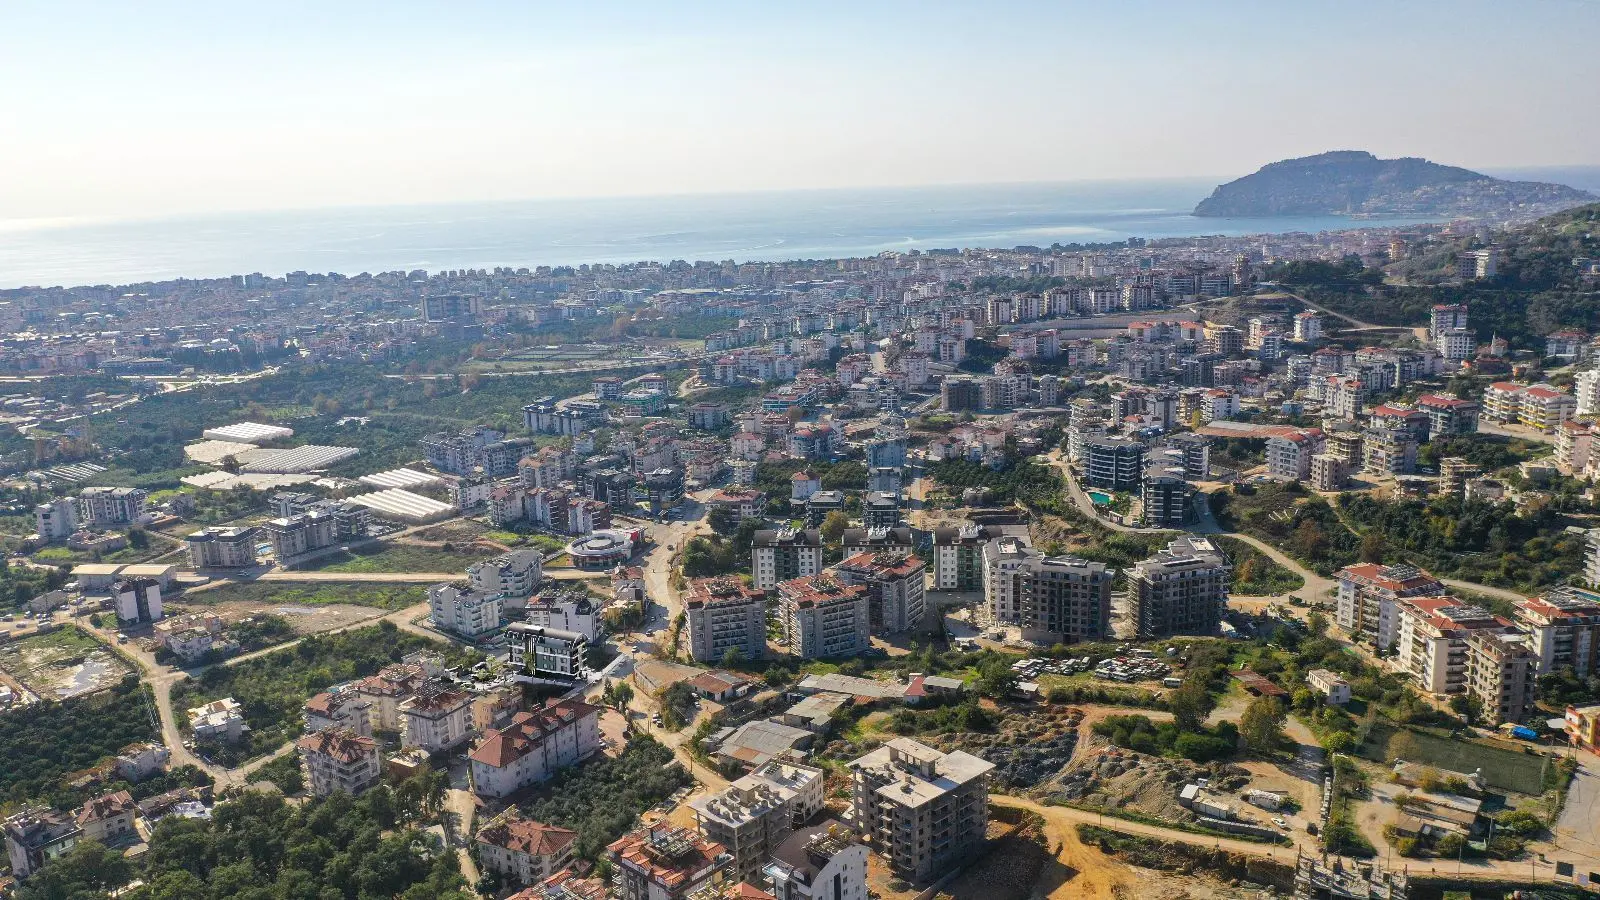 OUR NEW PROJECT 'GREEN TOWN 2' IN ALANYA OBA